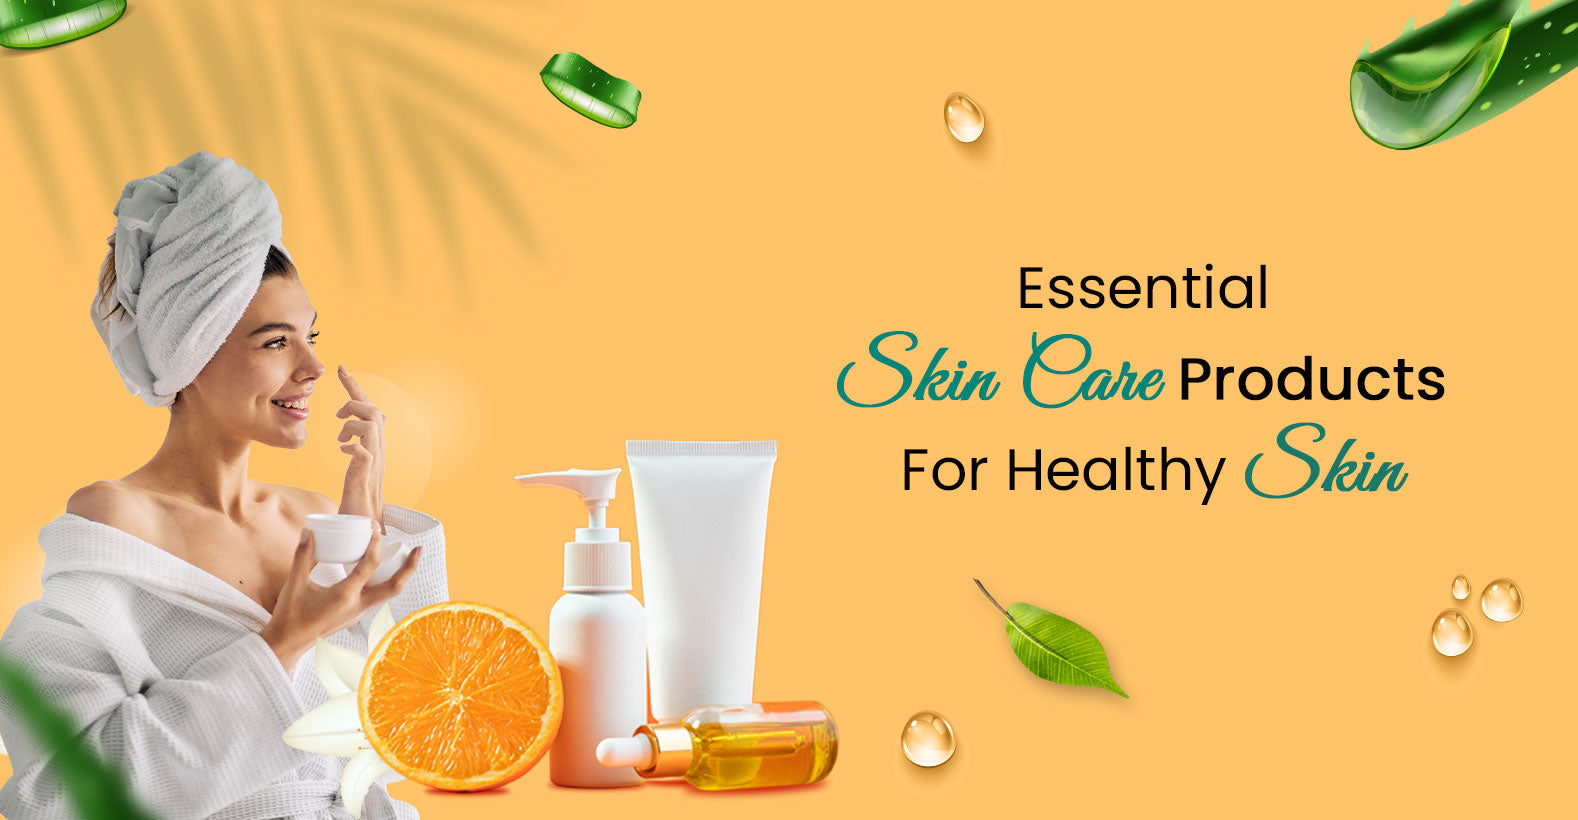 Essential SKIN CARE PRODUCTS FOR HEALTHY SKIN